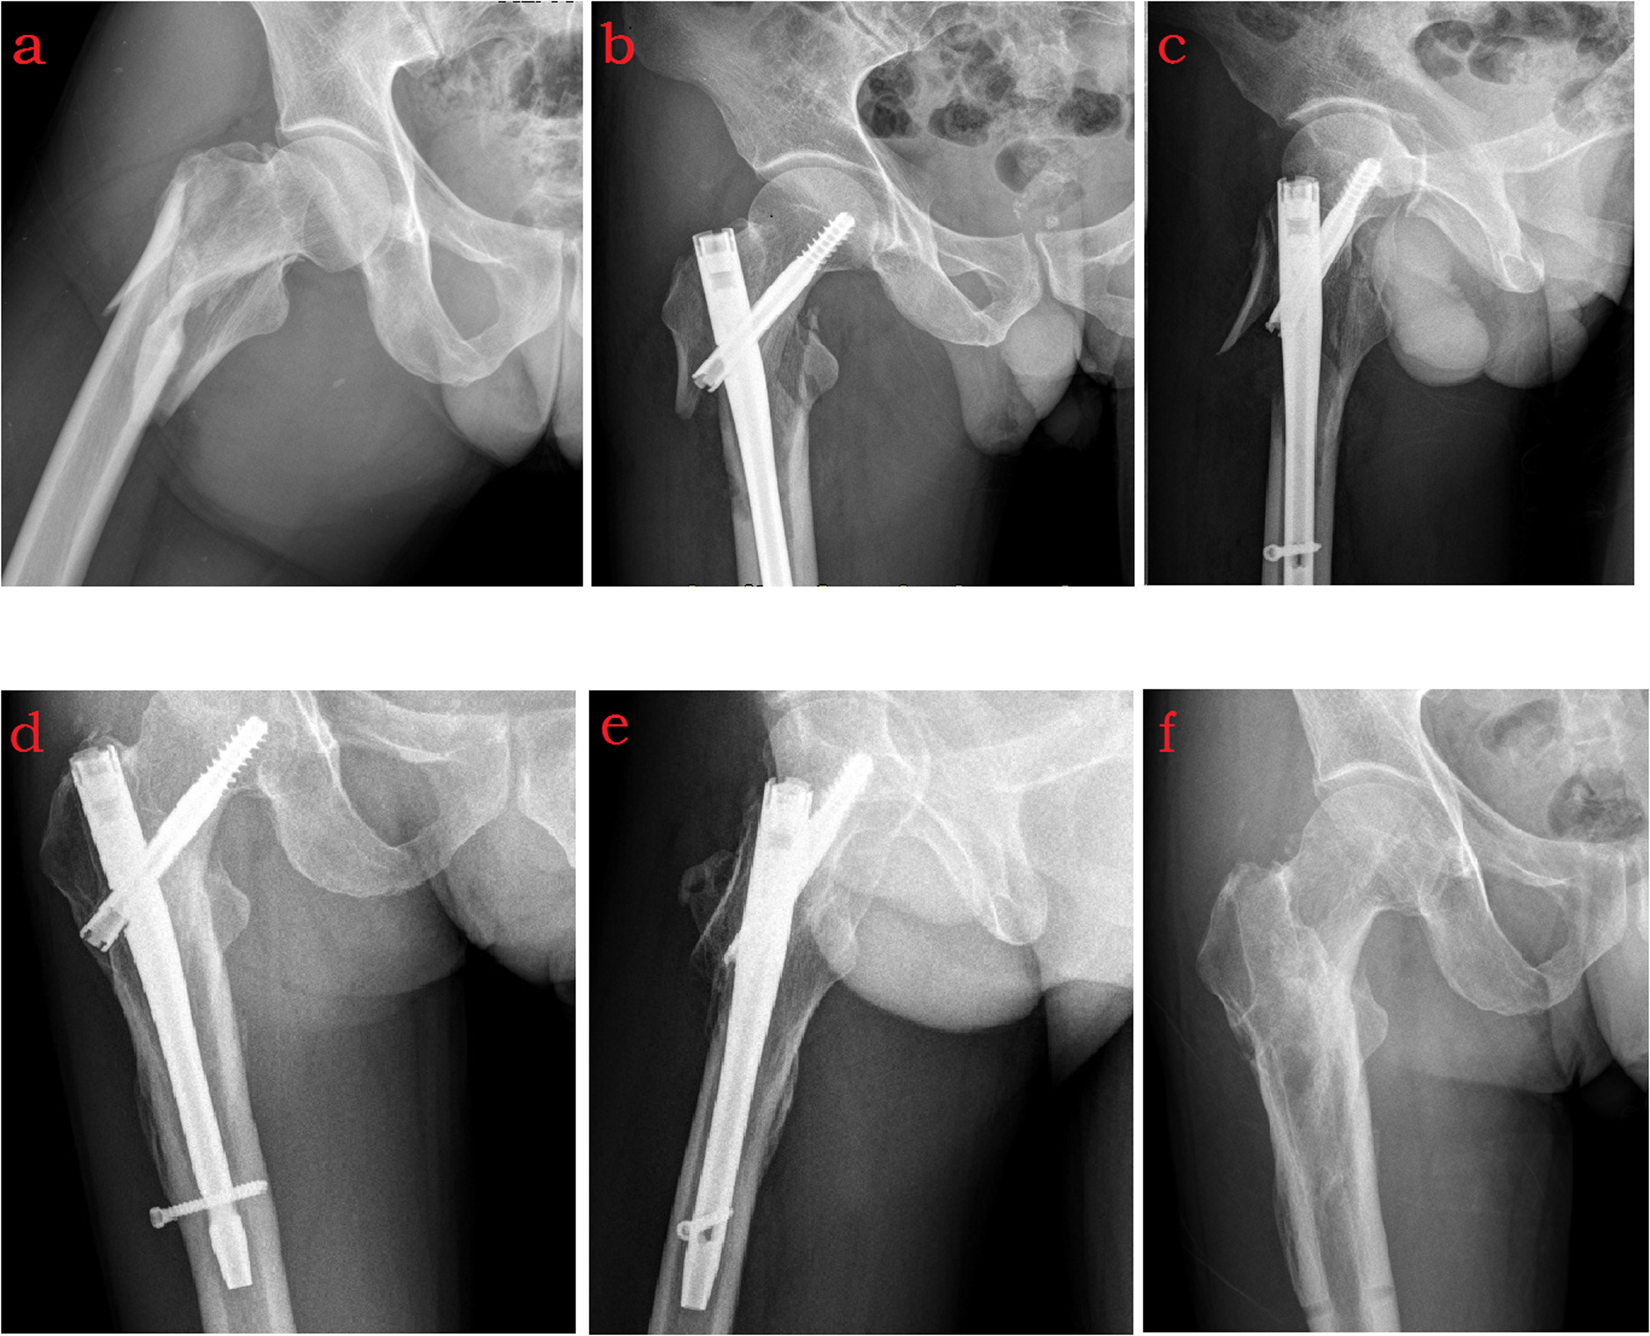 INTERTAN nail versus proximal femoral nail antirotationAsia for  intertrochanteric femur fractures in elderly patients with primary  osteoporosis  topic of research paper in Medical engineering Download  scholarly article PDF and read for